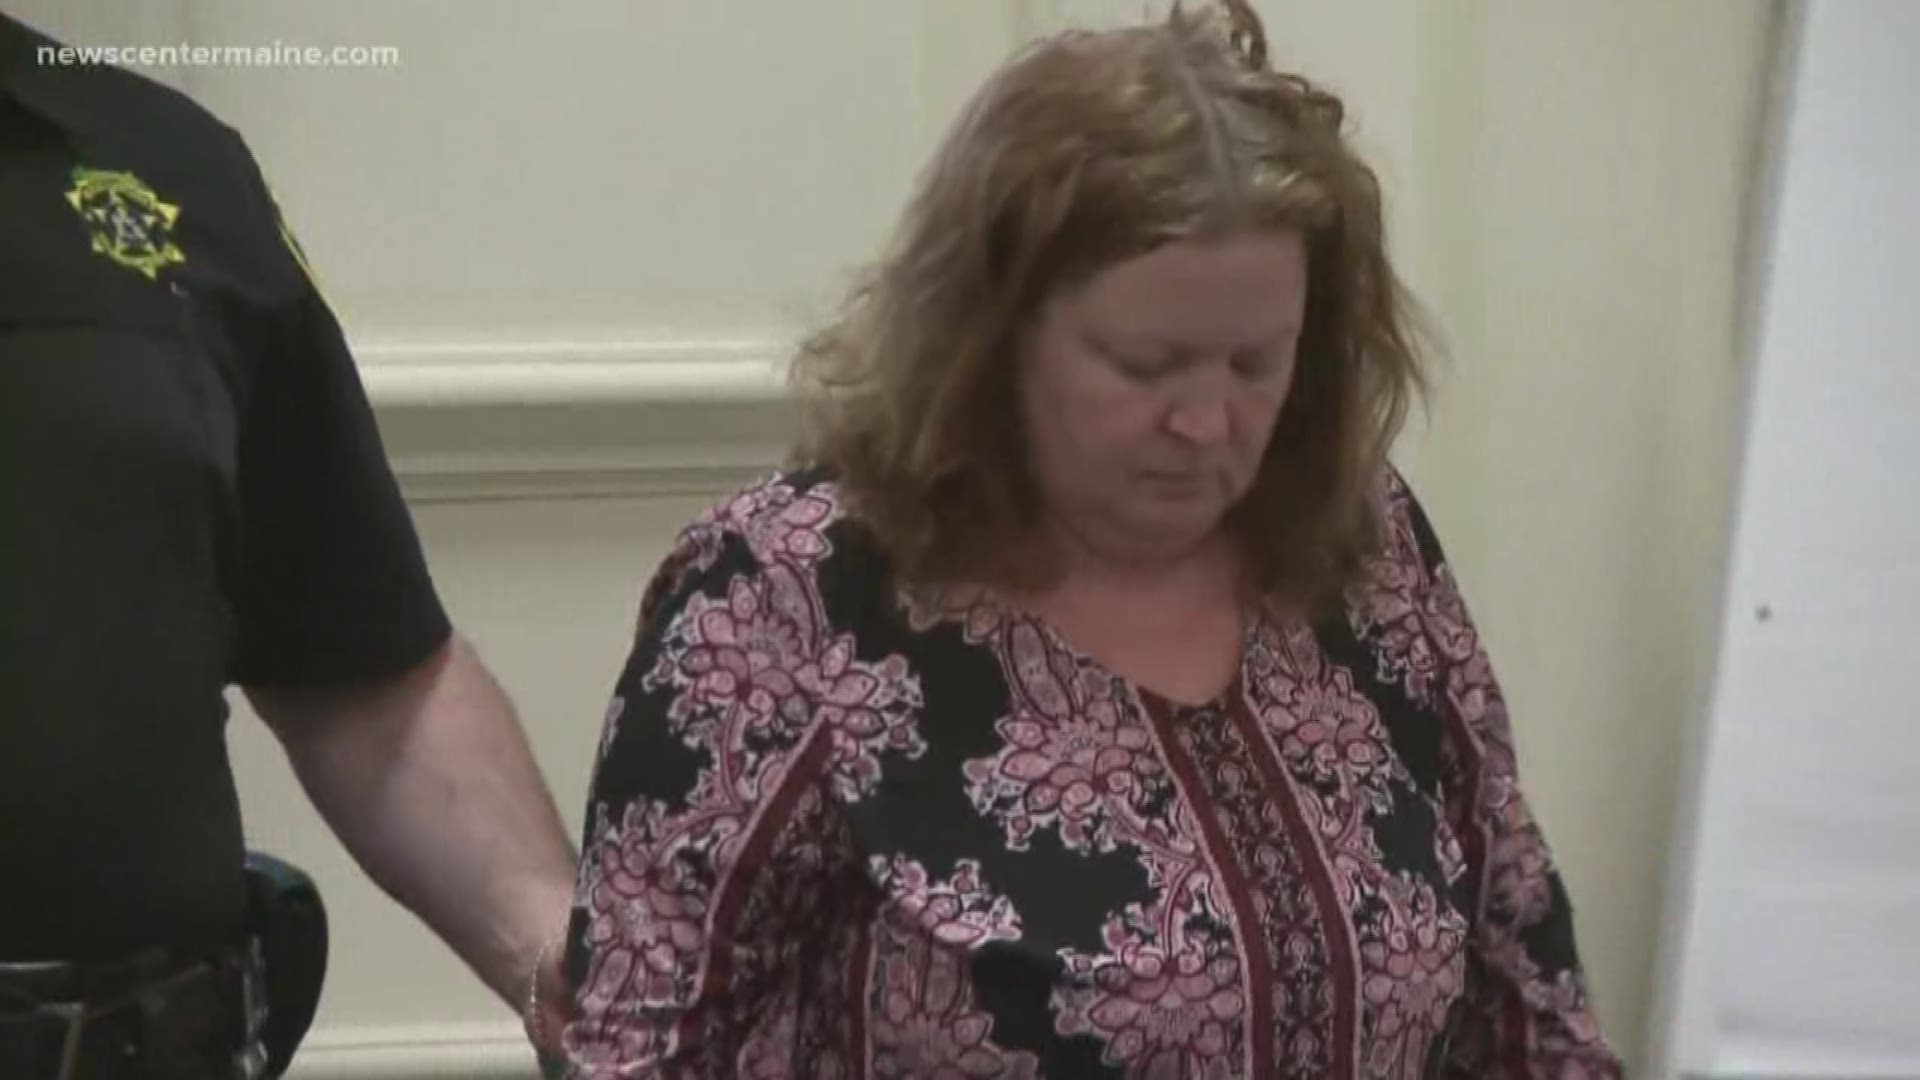 Acton woman accused of stabbing ex-husband pleads guilty